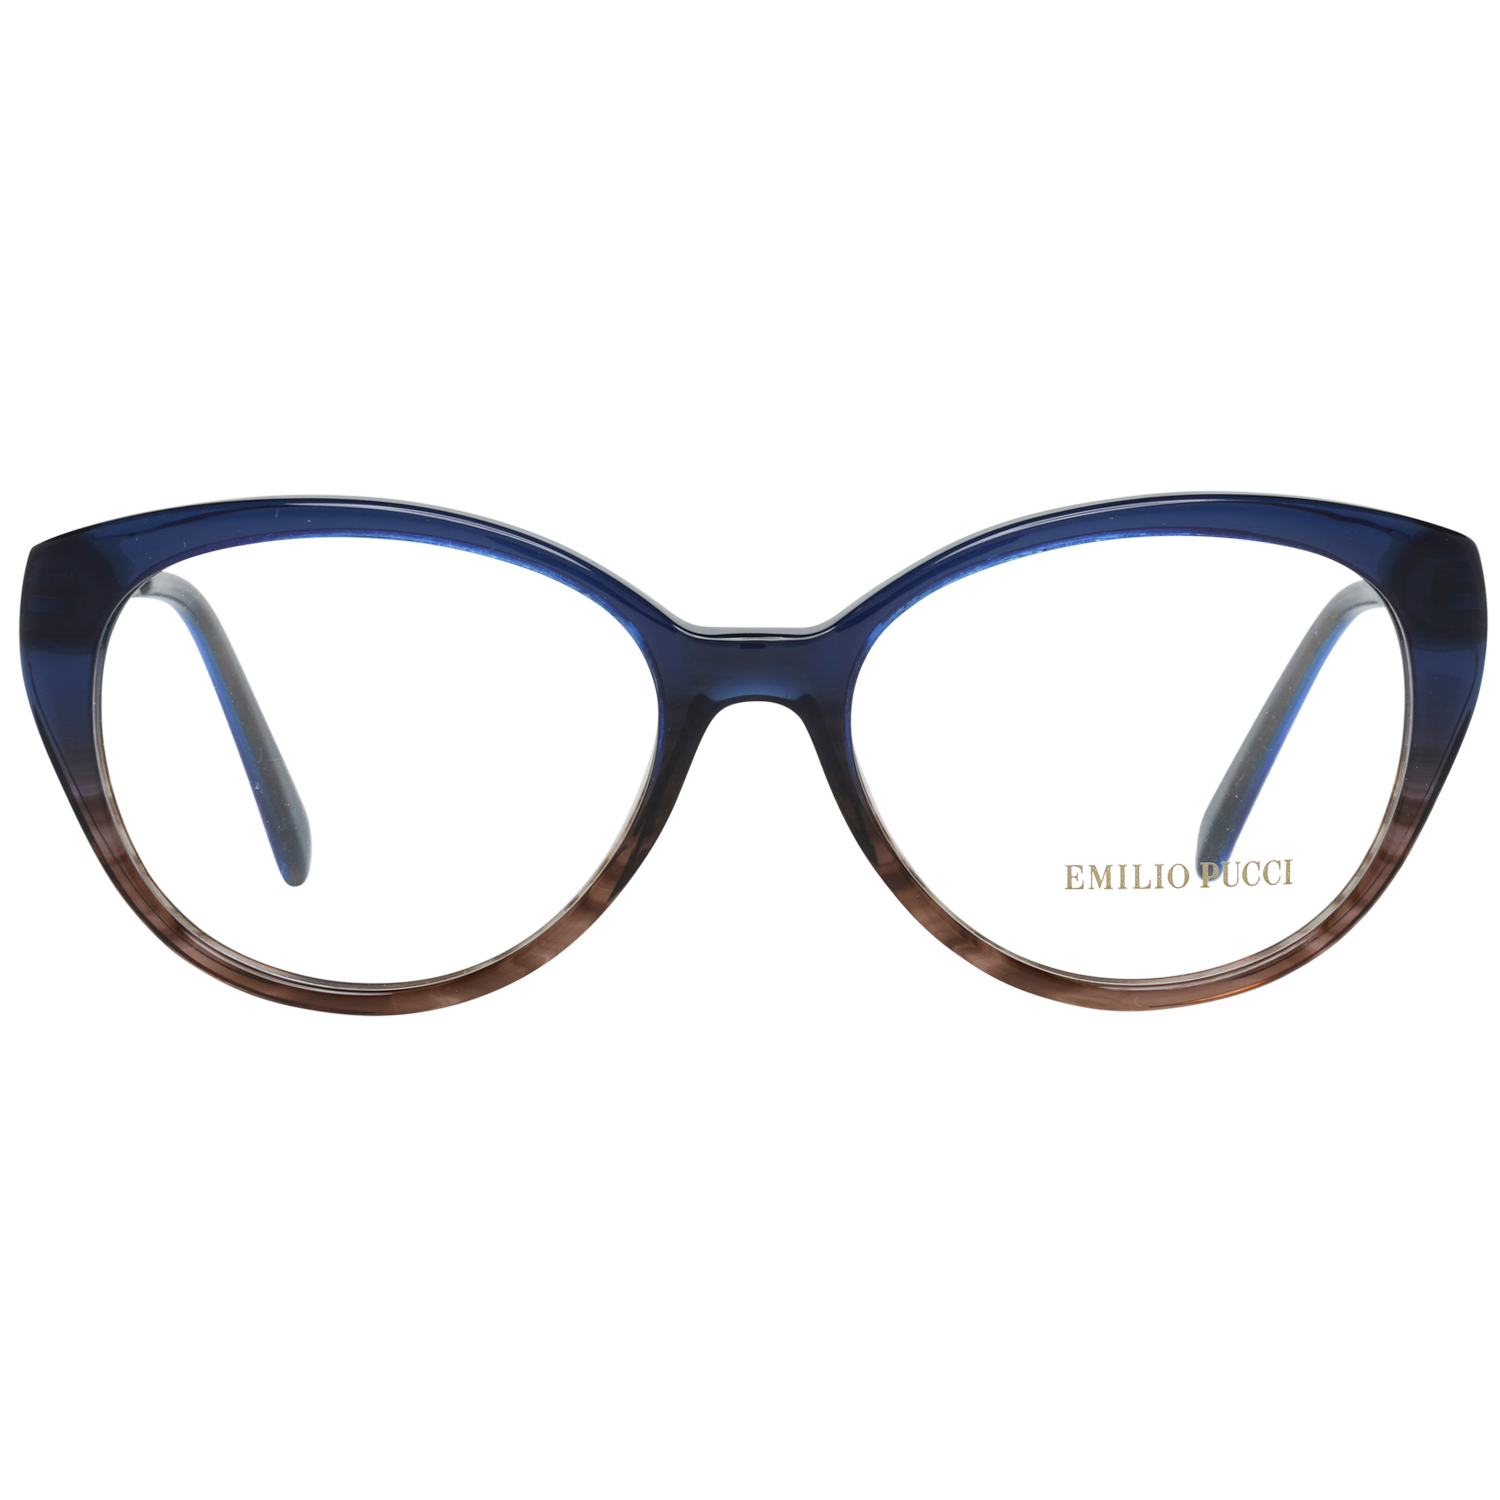 Emilio Pucci Optical Frame EP5063 092 53 Women
Frame color: Blue
Lenses width: 53
Lenses heigth: 41
Bridge length: 16
Frame width: 133
Temple length: 140
Shipment includes: Case, Cleaning cloth
Style: Full-Rim
Spring hinge: Yes